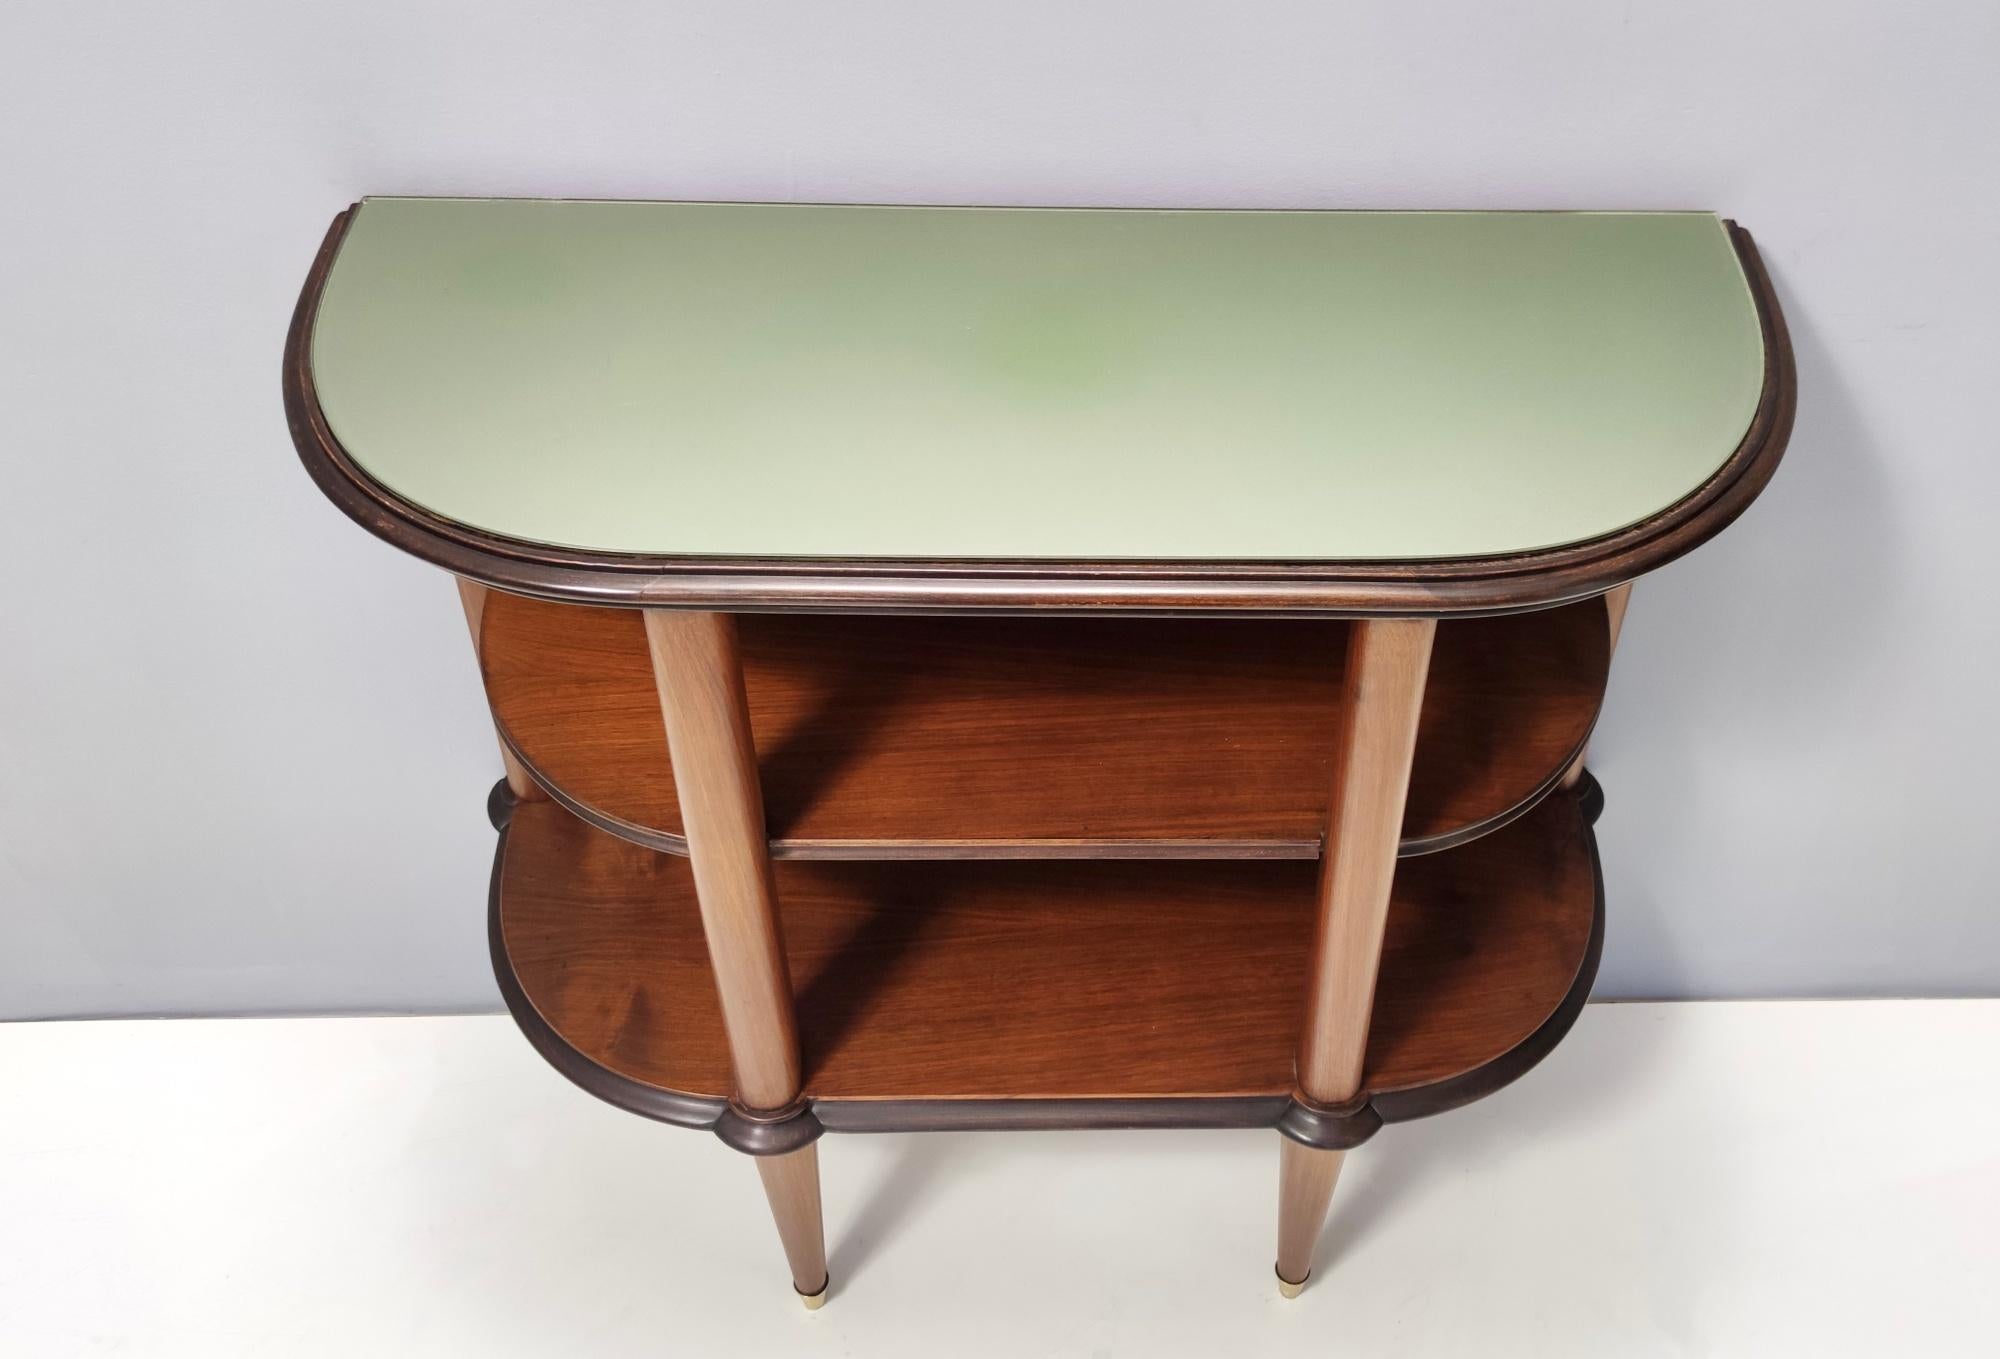 Vintage Walnut Console Table with a Light Green Glass Top and Two Shelves, Italy In Good Condition For Sale In Bresso, Lombardy